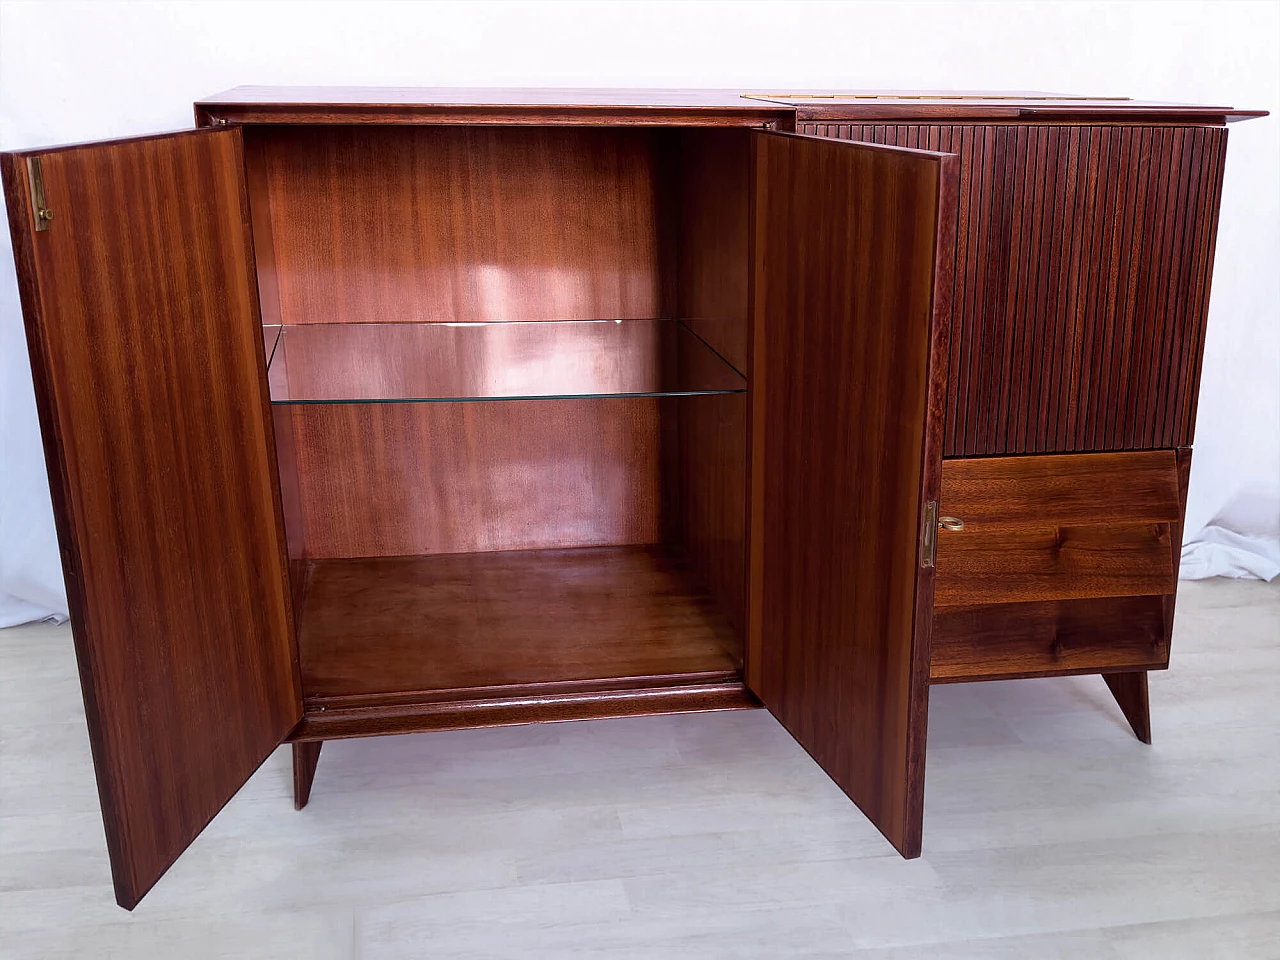 Teak sideboard with bar compartment by Vittorio Dassi, 1950s 21